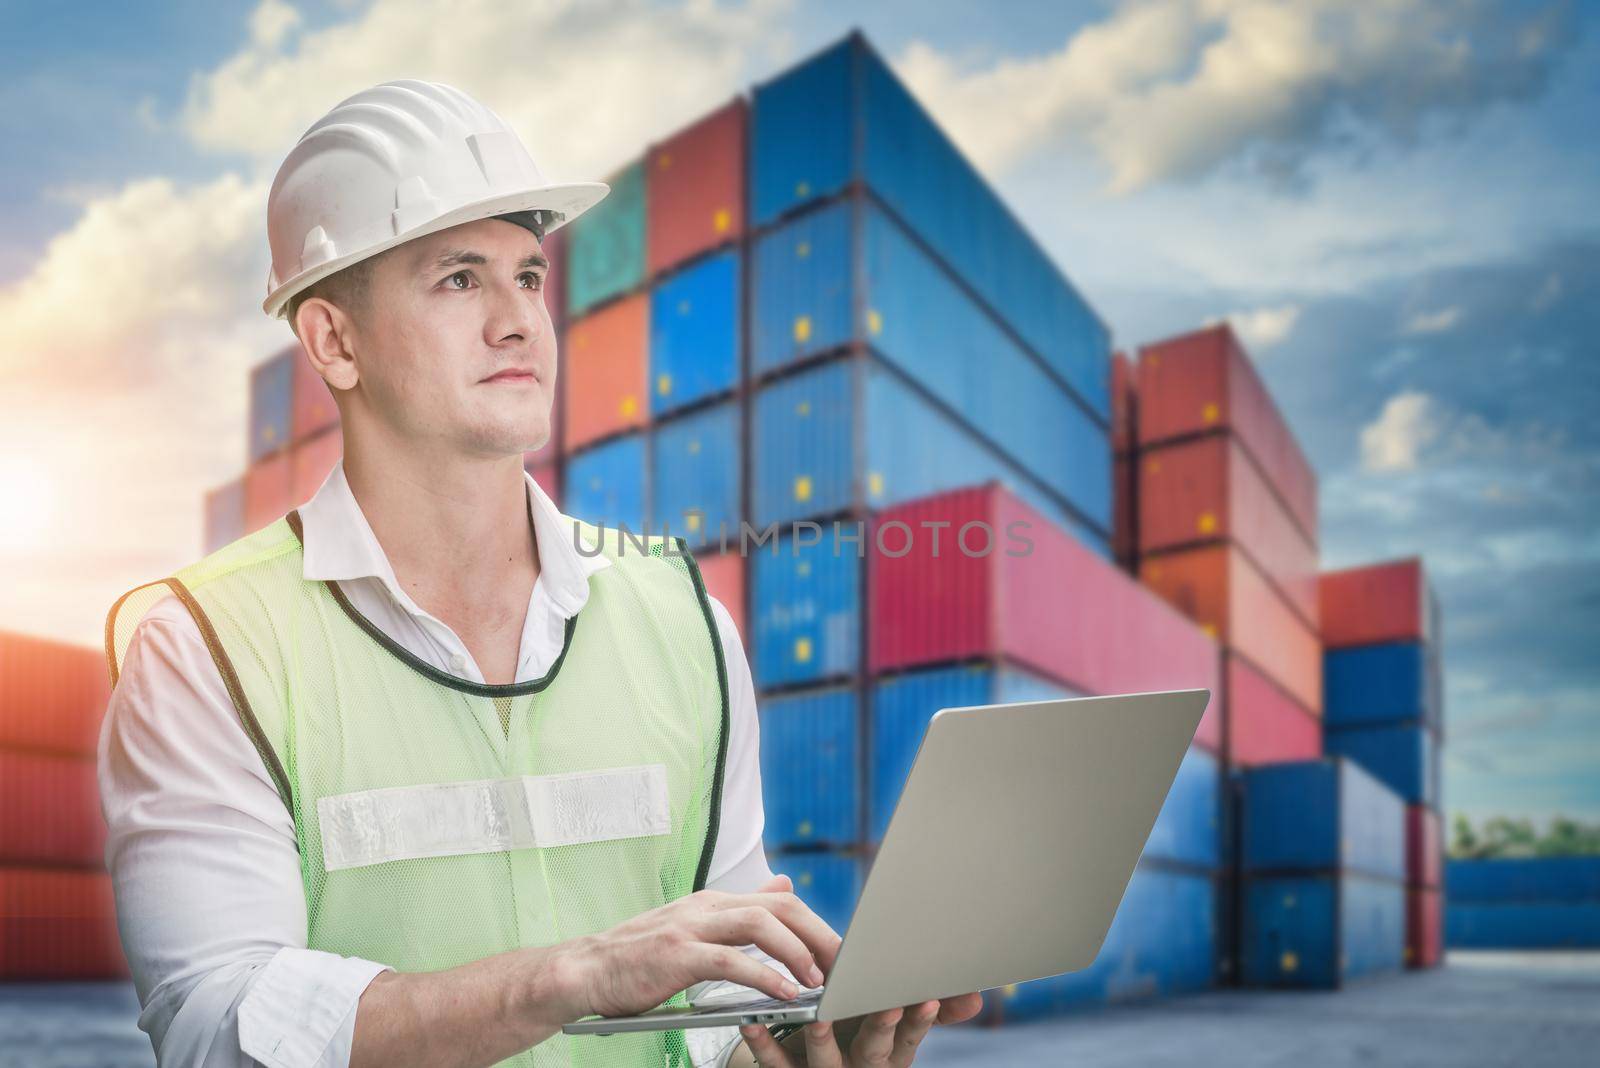 Container Supervisor Control Import/Export While Inspecting Containers Box in Warehouse Storage Distribution. Container Logistics Shipping Controlling of Transportation Industry, Cargo Ship Factory by MahaHeang245789